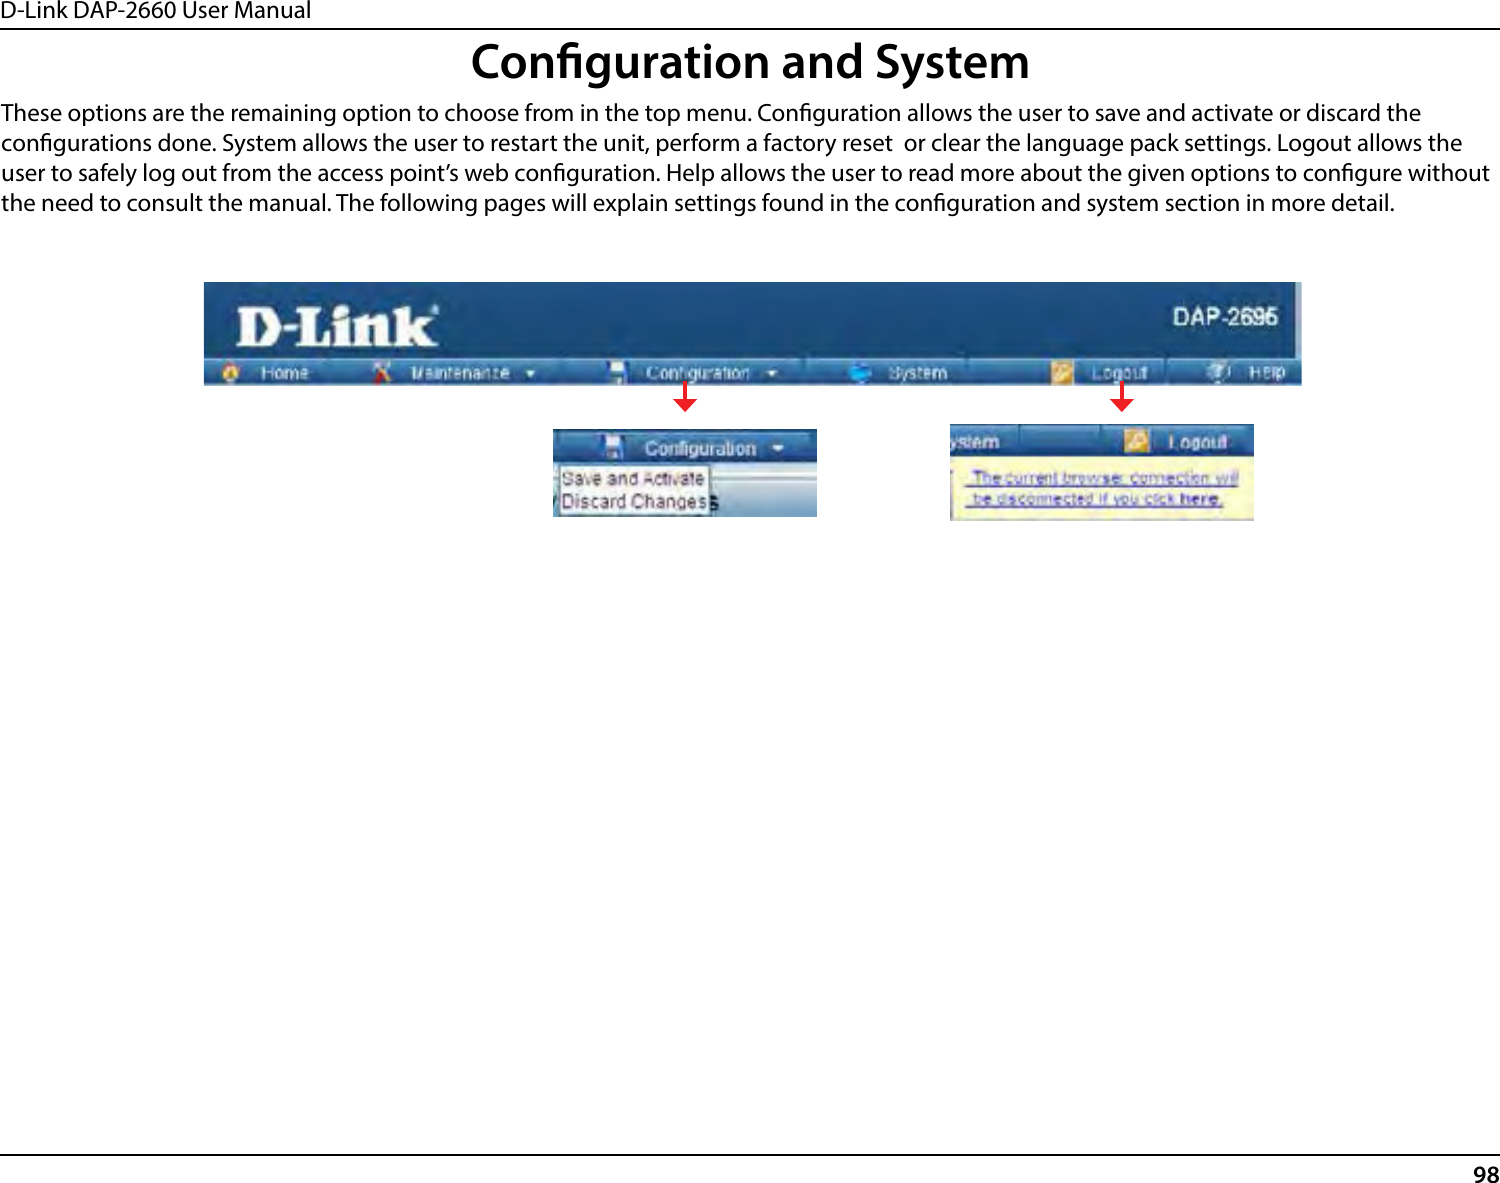 D-Link DAP-2660 User Manual98Conguration and SystemThese options are the remaining option to choose from in the top menu. Conguration allows the user to save and activate or discard the congurations done. System allows the user to restart the unit, perform a factory reset  or clear the language pack settings. Logout allows the user to safely log out from the access point’s web conguration. Help allows the user to read more about the given options to congure without the need to consult the manual. The following pages will explain settings found in the conguration and system section in more detail.